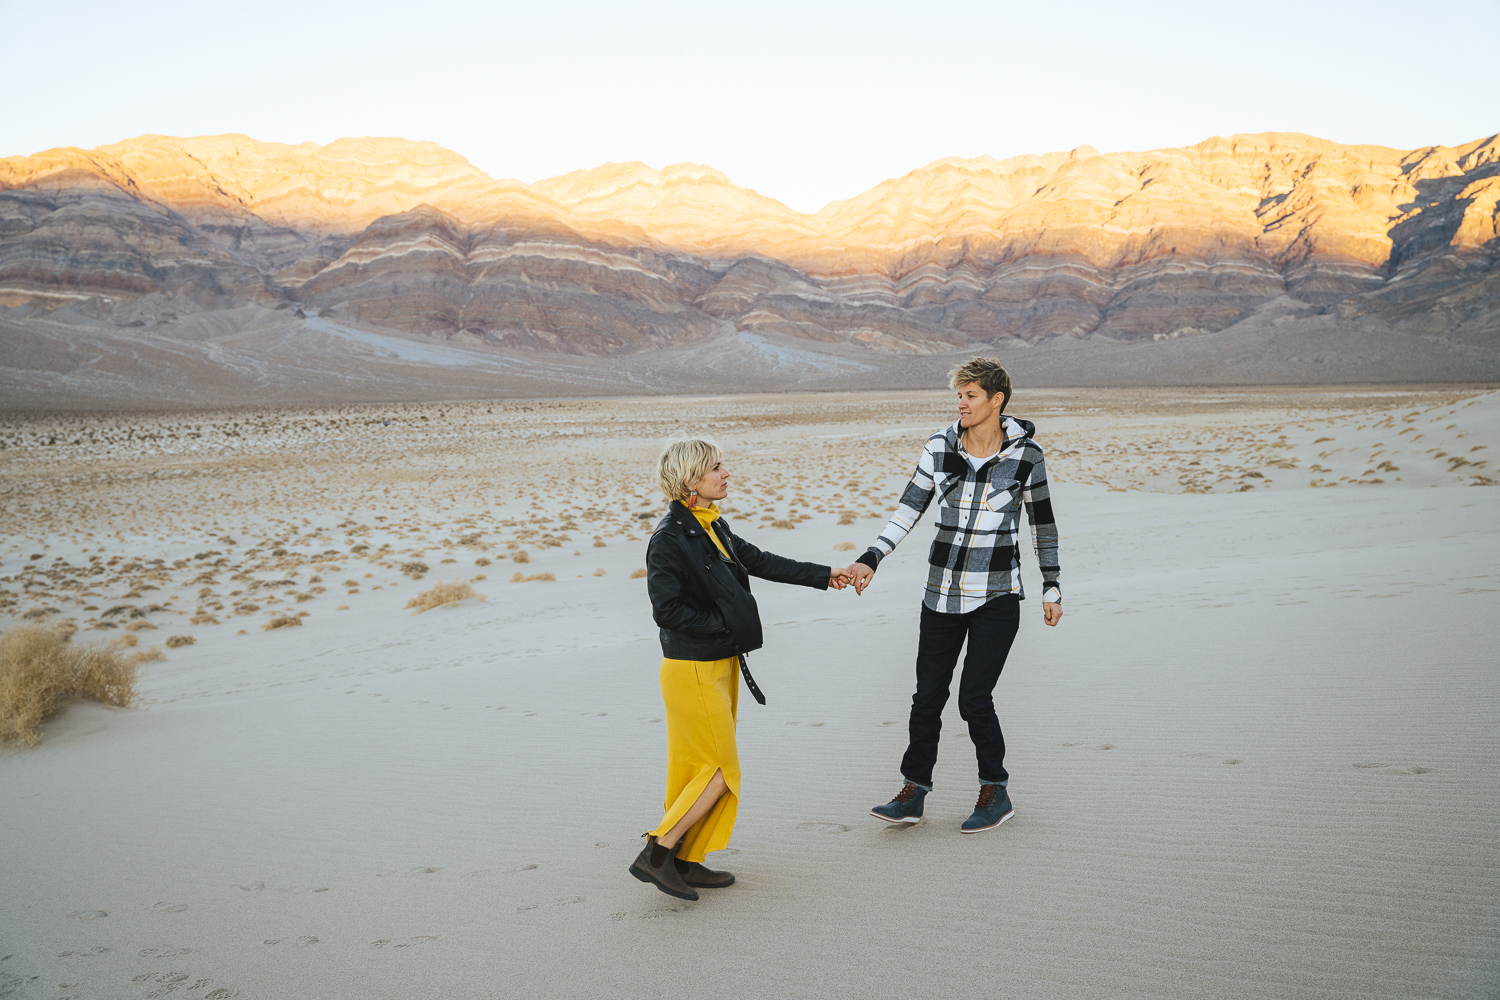 Two brides in the Death Valley Sand dunes, casual yellow dress